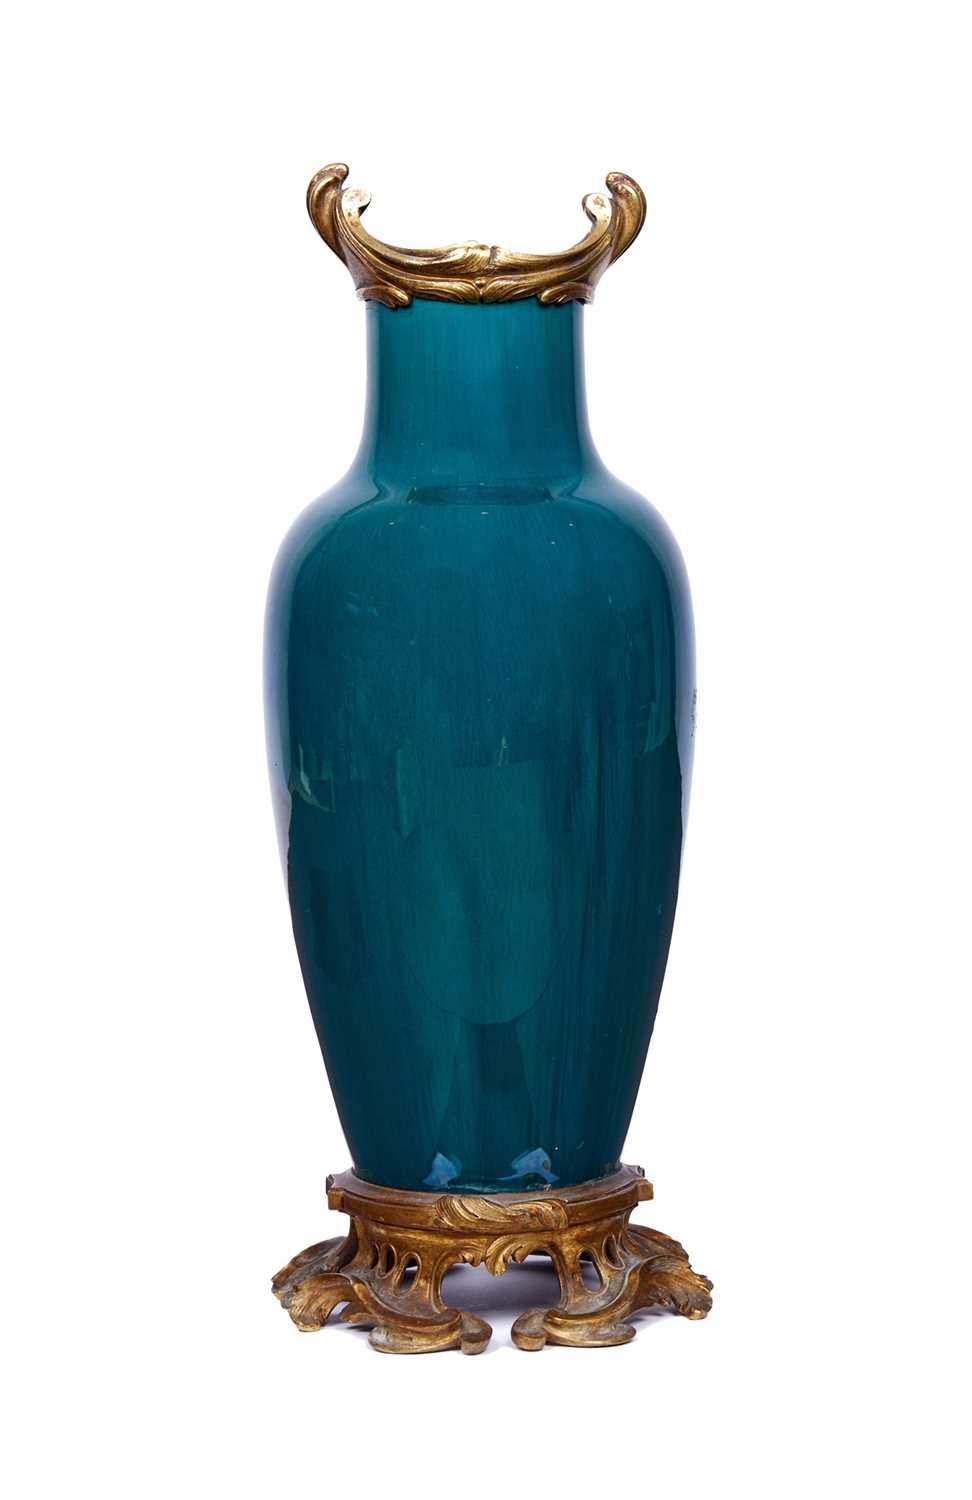 A FINE 19TH CENTURY ORMOLU MOUNTED CHINESE TURQUOISE VASE - Image 2 of 12